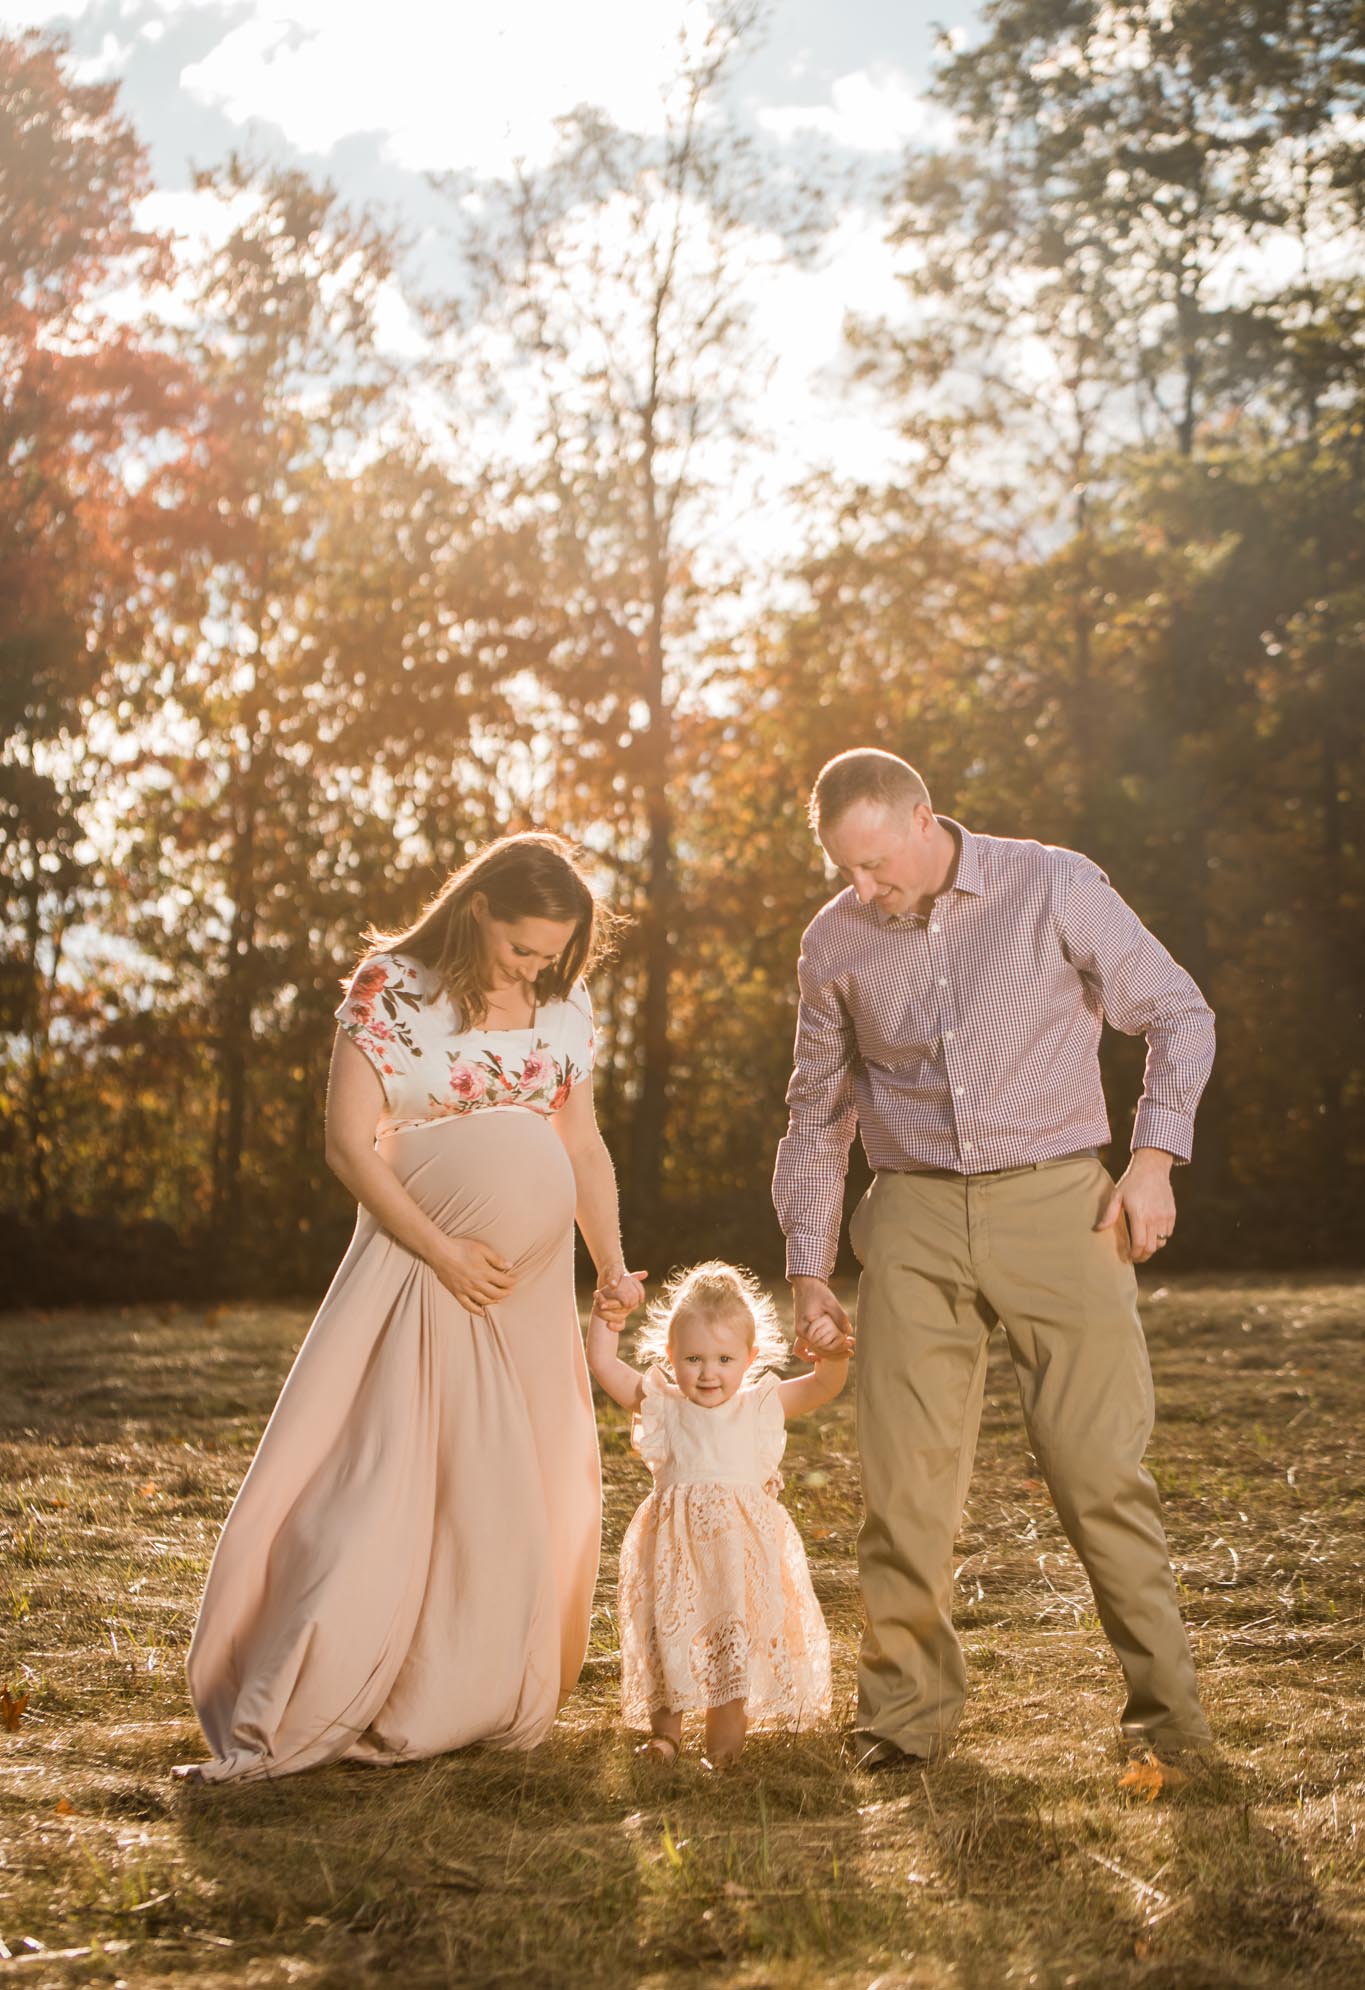 Bromley Family 3 1 - Maternity Photography